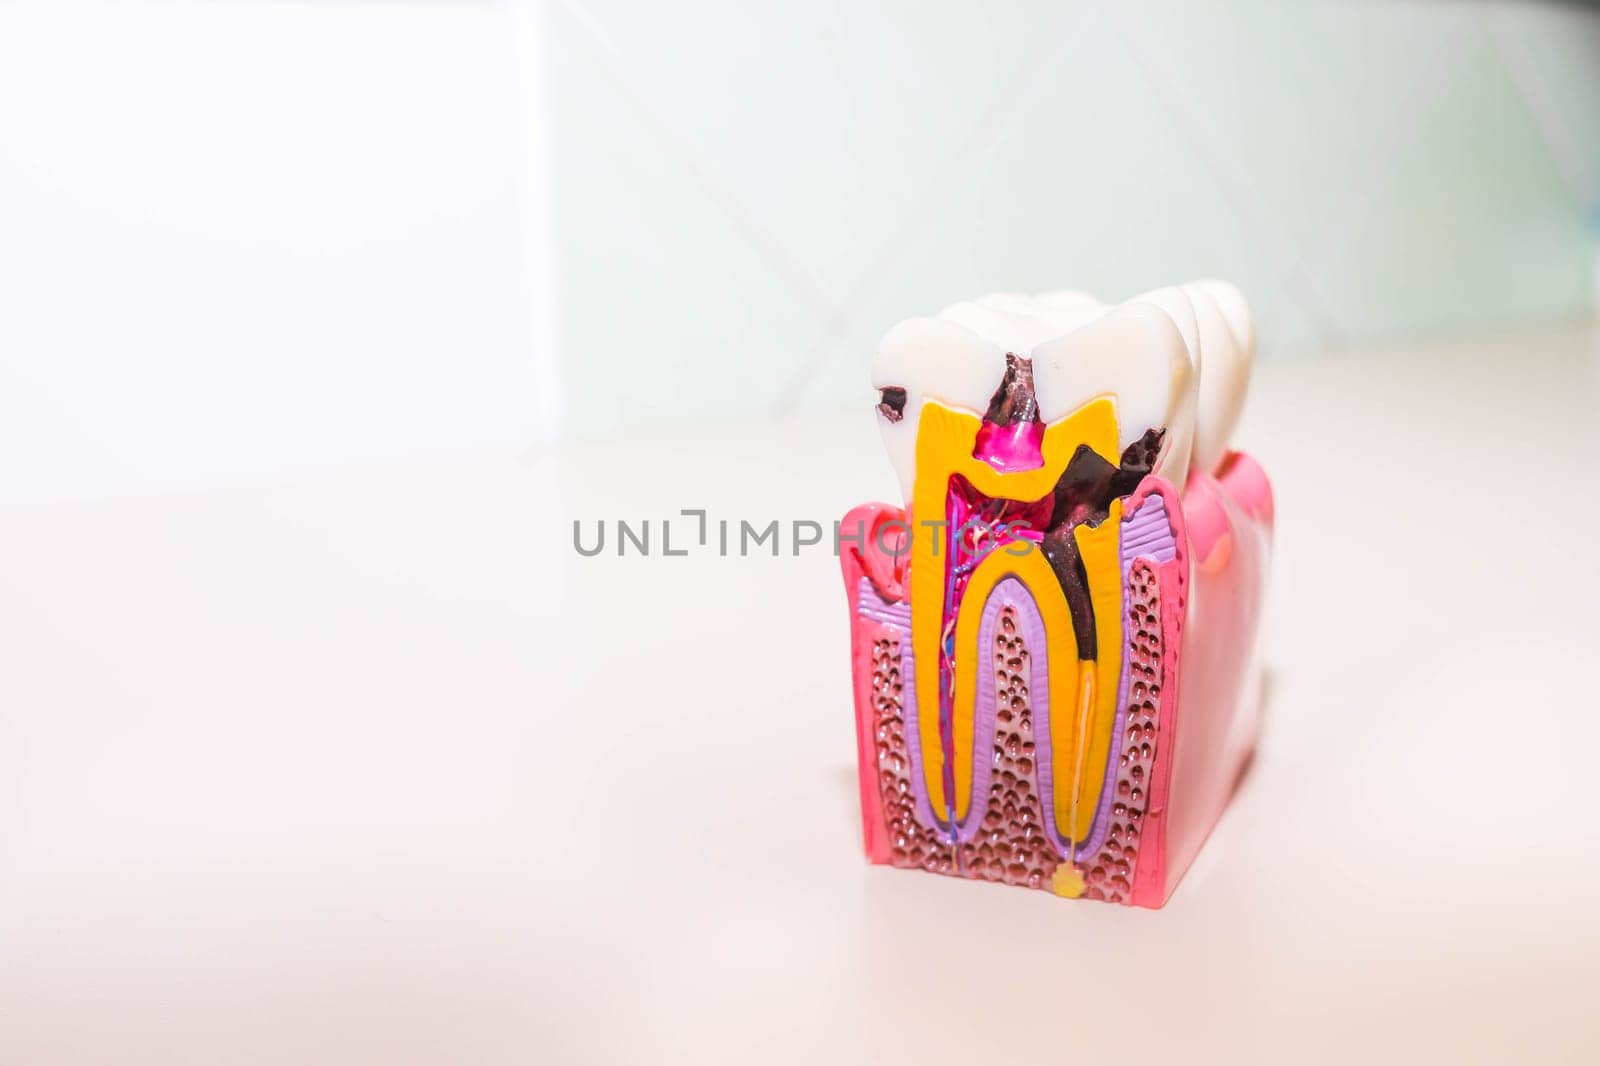 tooth model with caries, tooth decay in dentist's office. Healthy teeth concept . Big tooth model with details on the nerve, dentin, enamel, cavities and abscesses, dental diseases.Copy space by YuliaYaspe1979